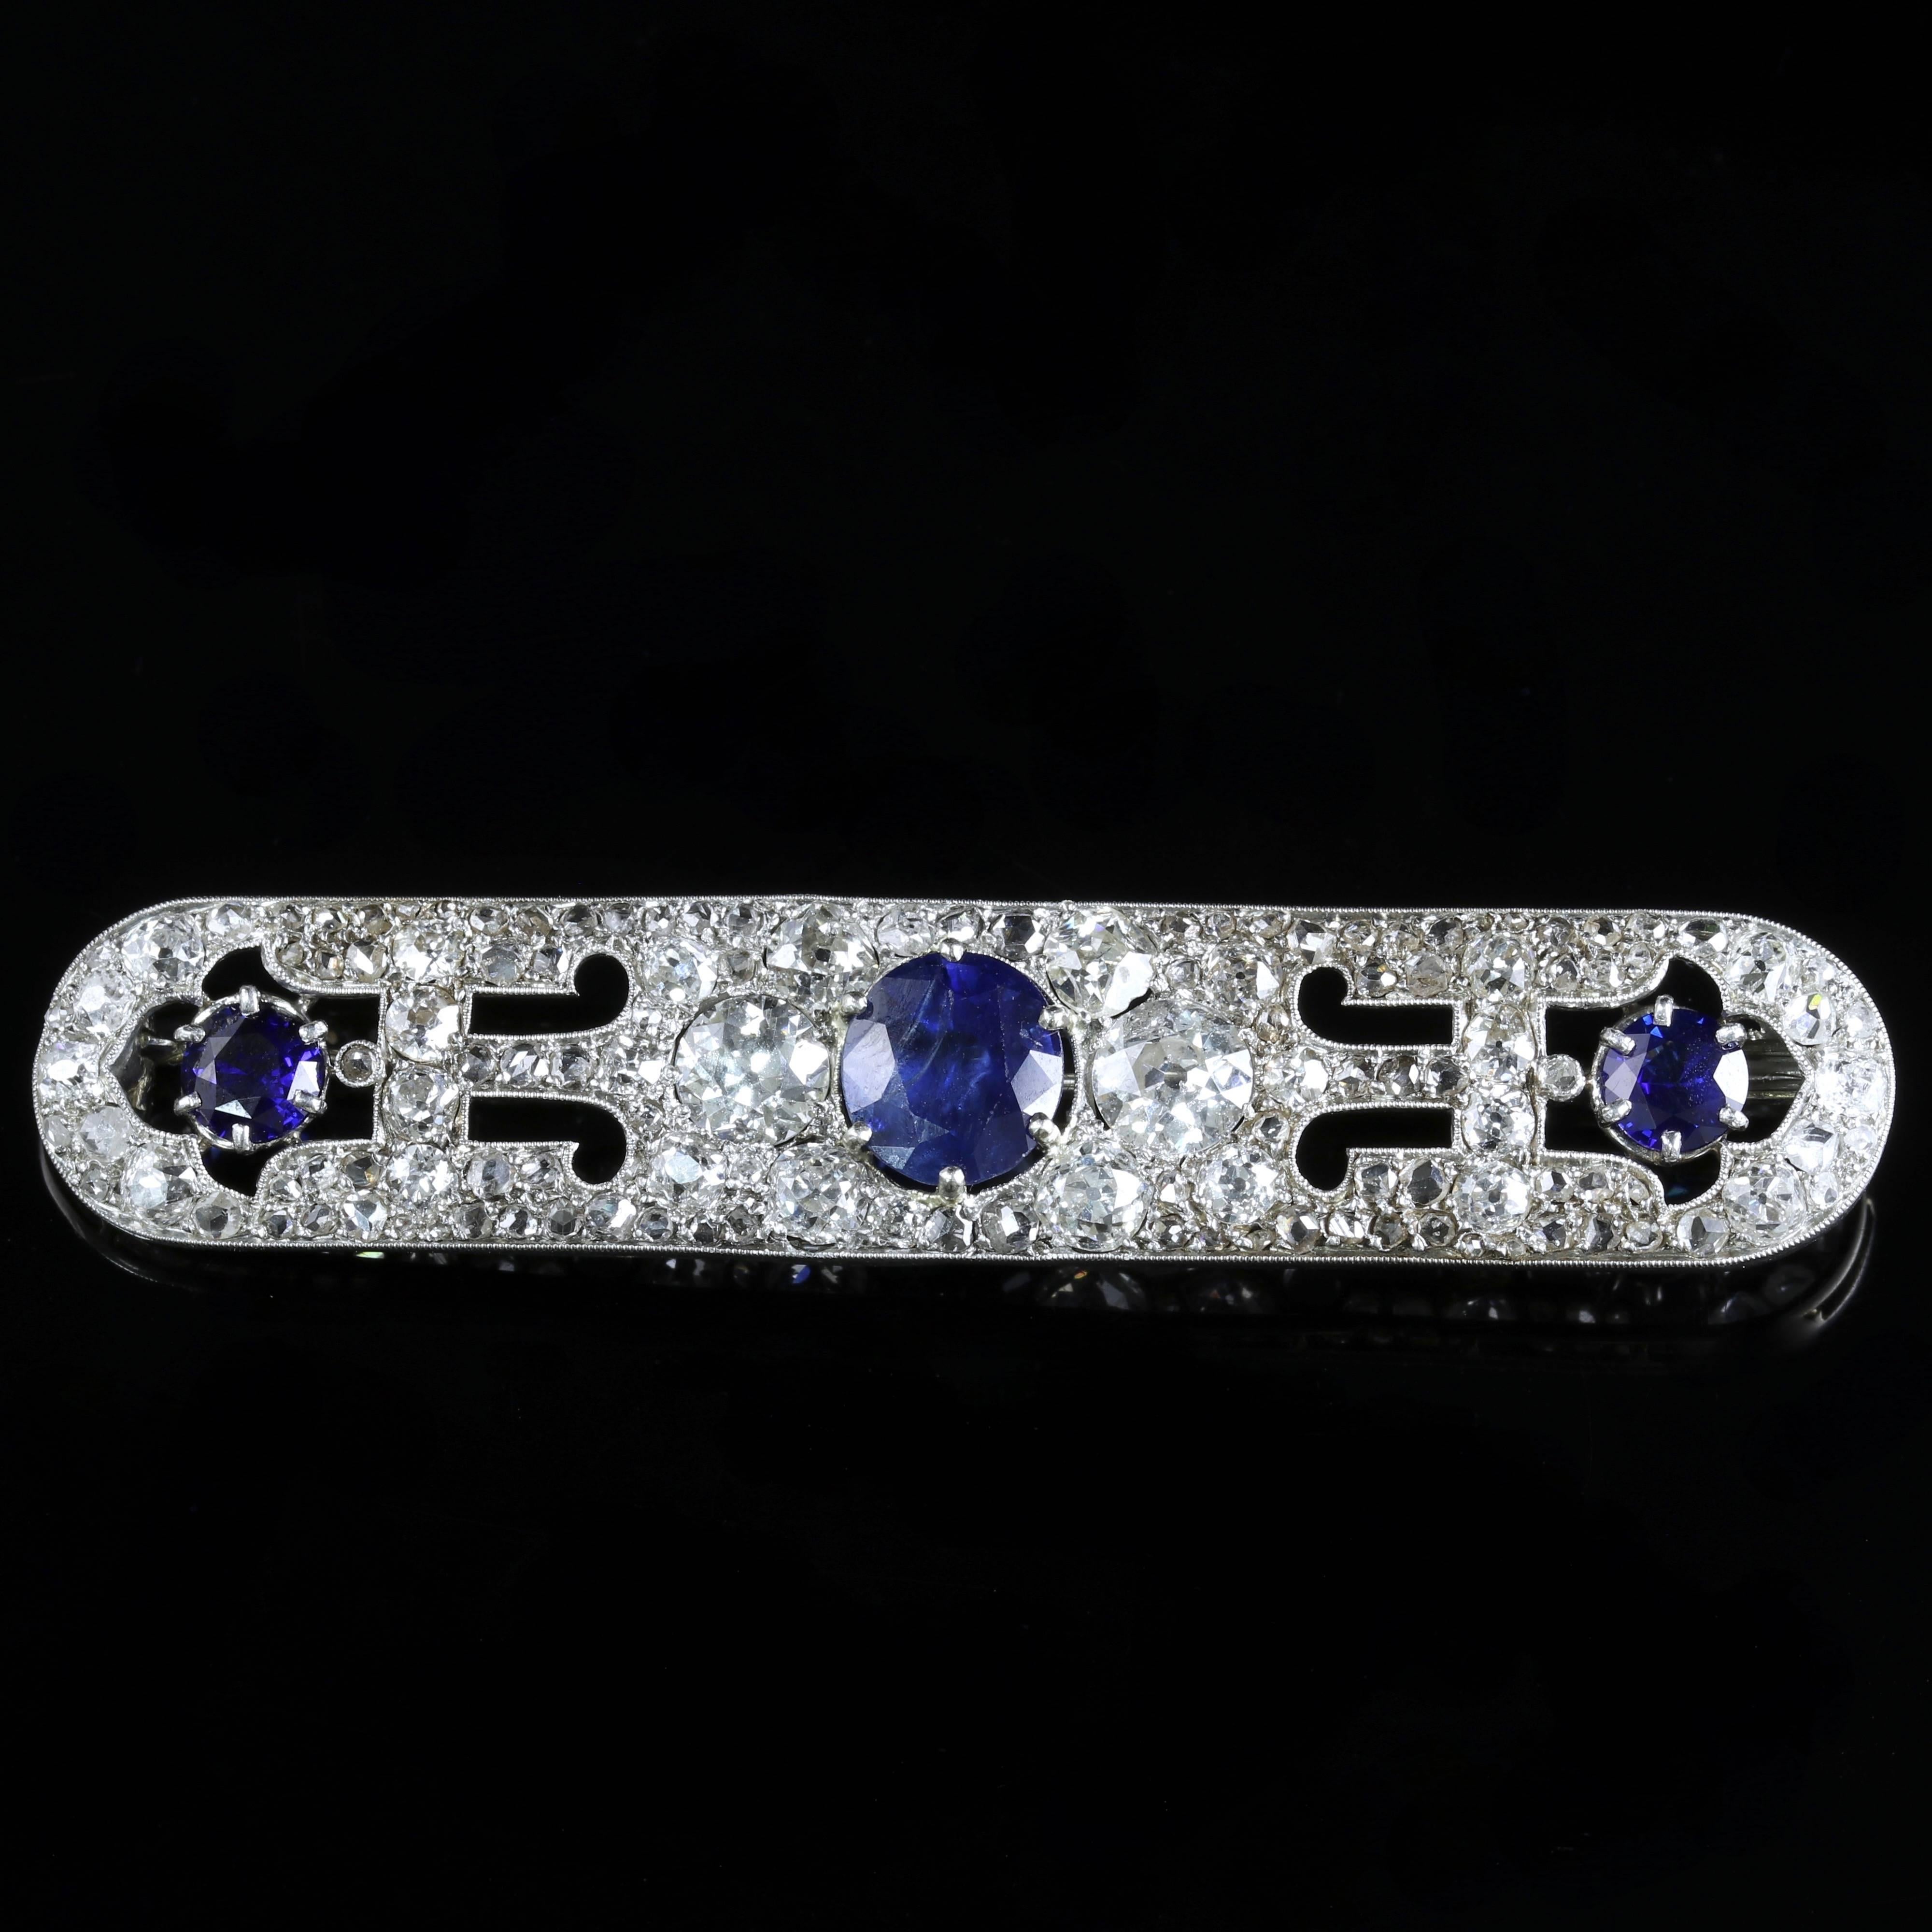 To read more please click continue reading below-

This fabulous all Platinum French brooch is genuine Edwardian, Circa 1910. 

The Brooch is hand made and set with Diamonds and a trilogy of best cut natural blue Sapphires.

Sapphire is the symbol